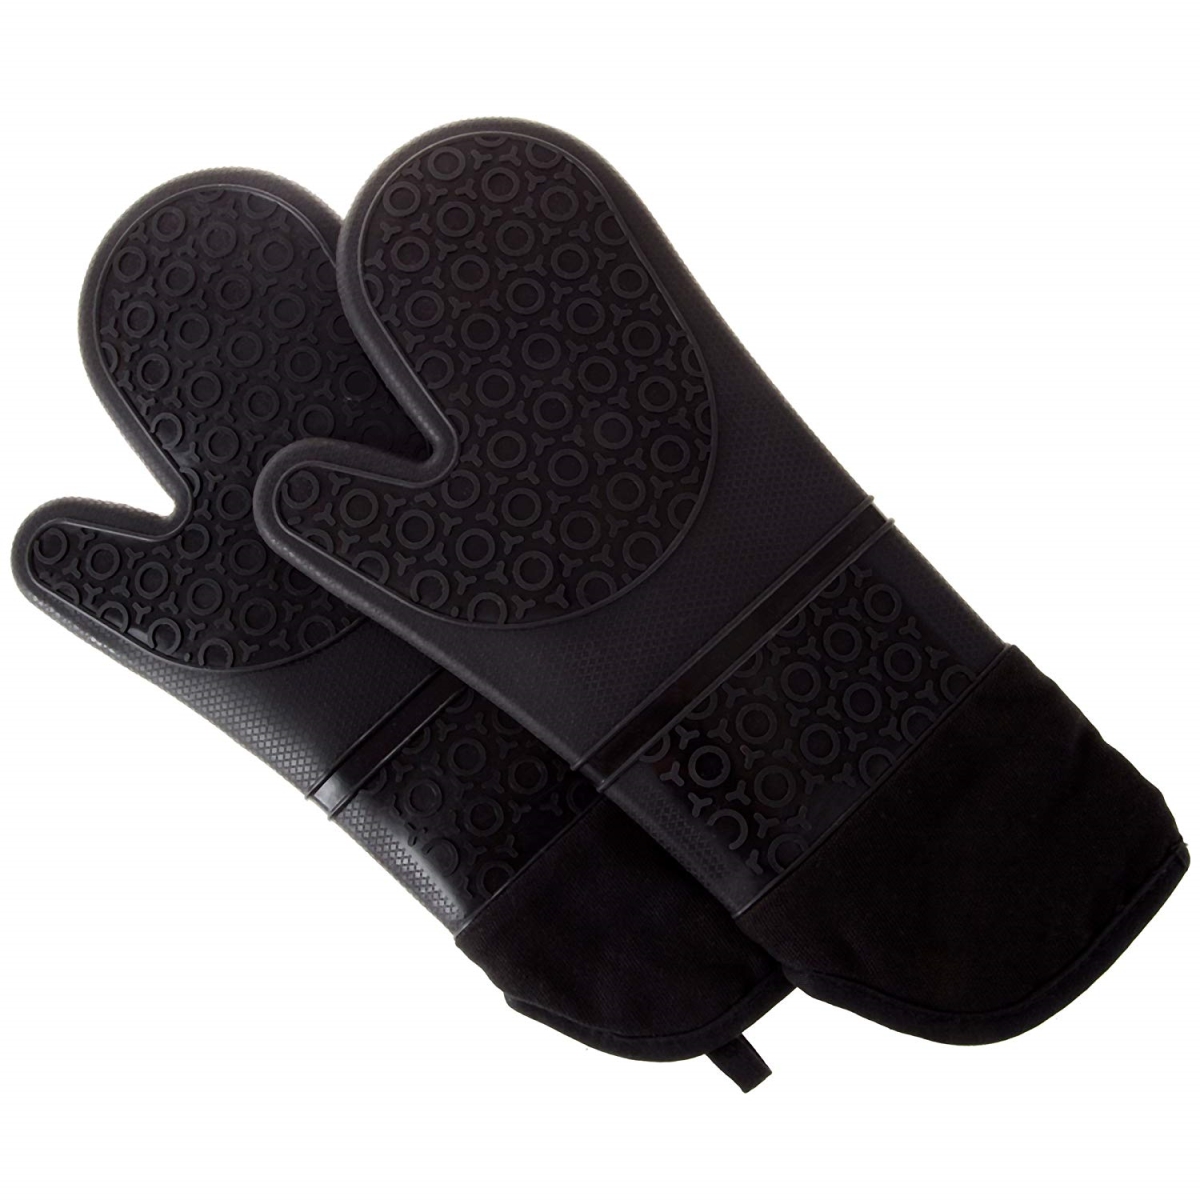 69a-64421 Silicone Oven Mitts - Black